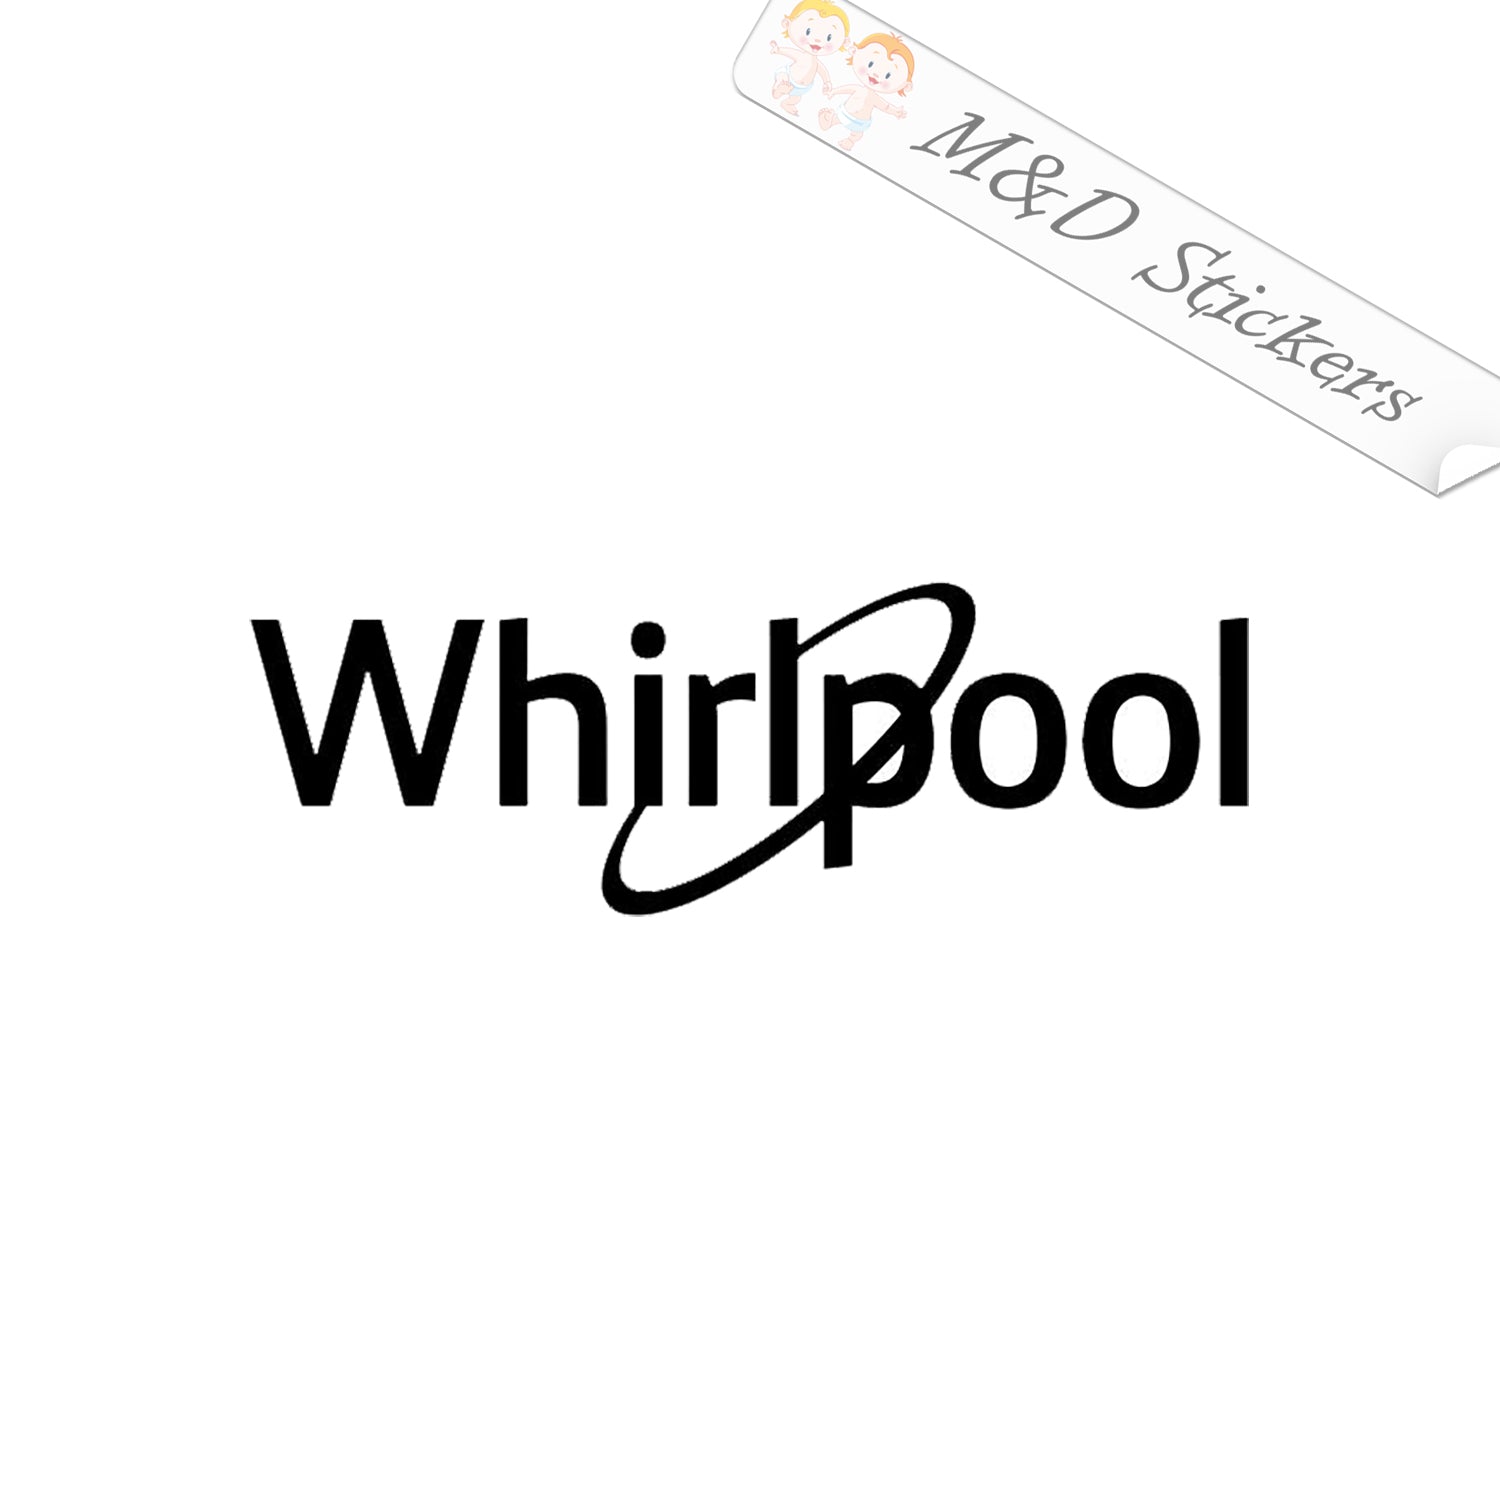 Whirlpool Logo Cliparts, Stock Vector and Royalty Free Whirlpool Logo  Illustrations